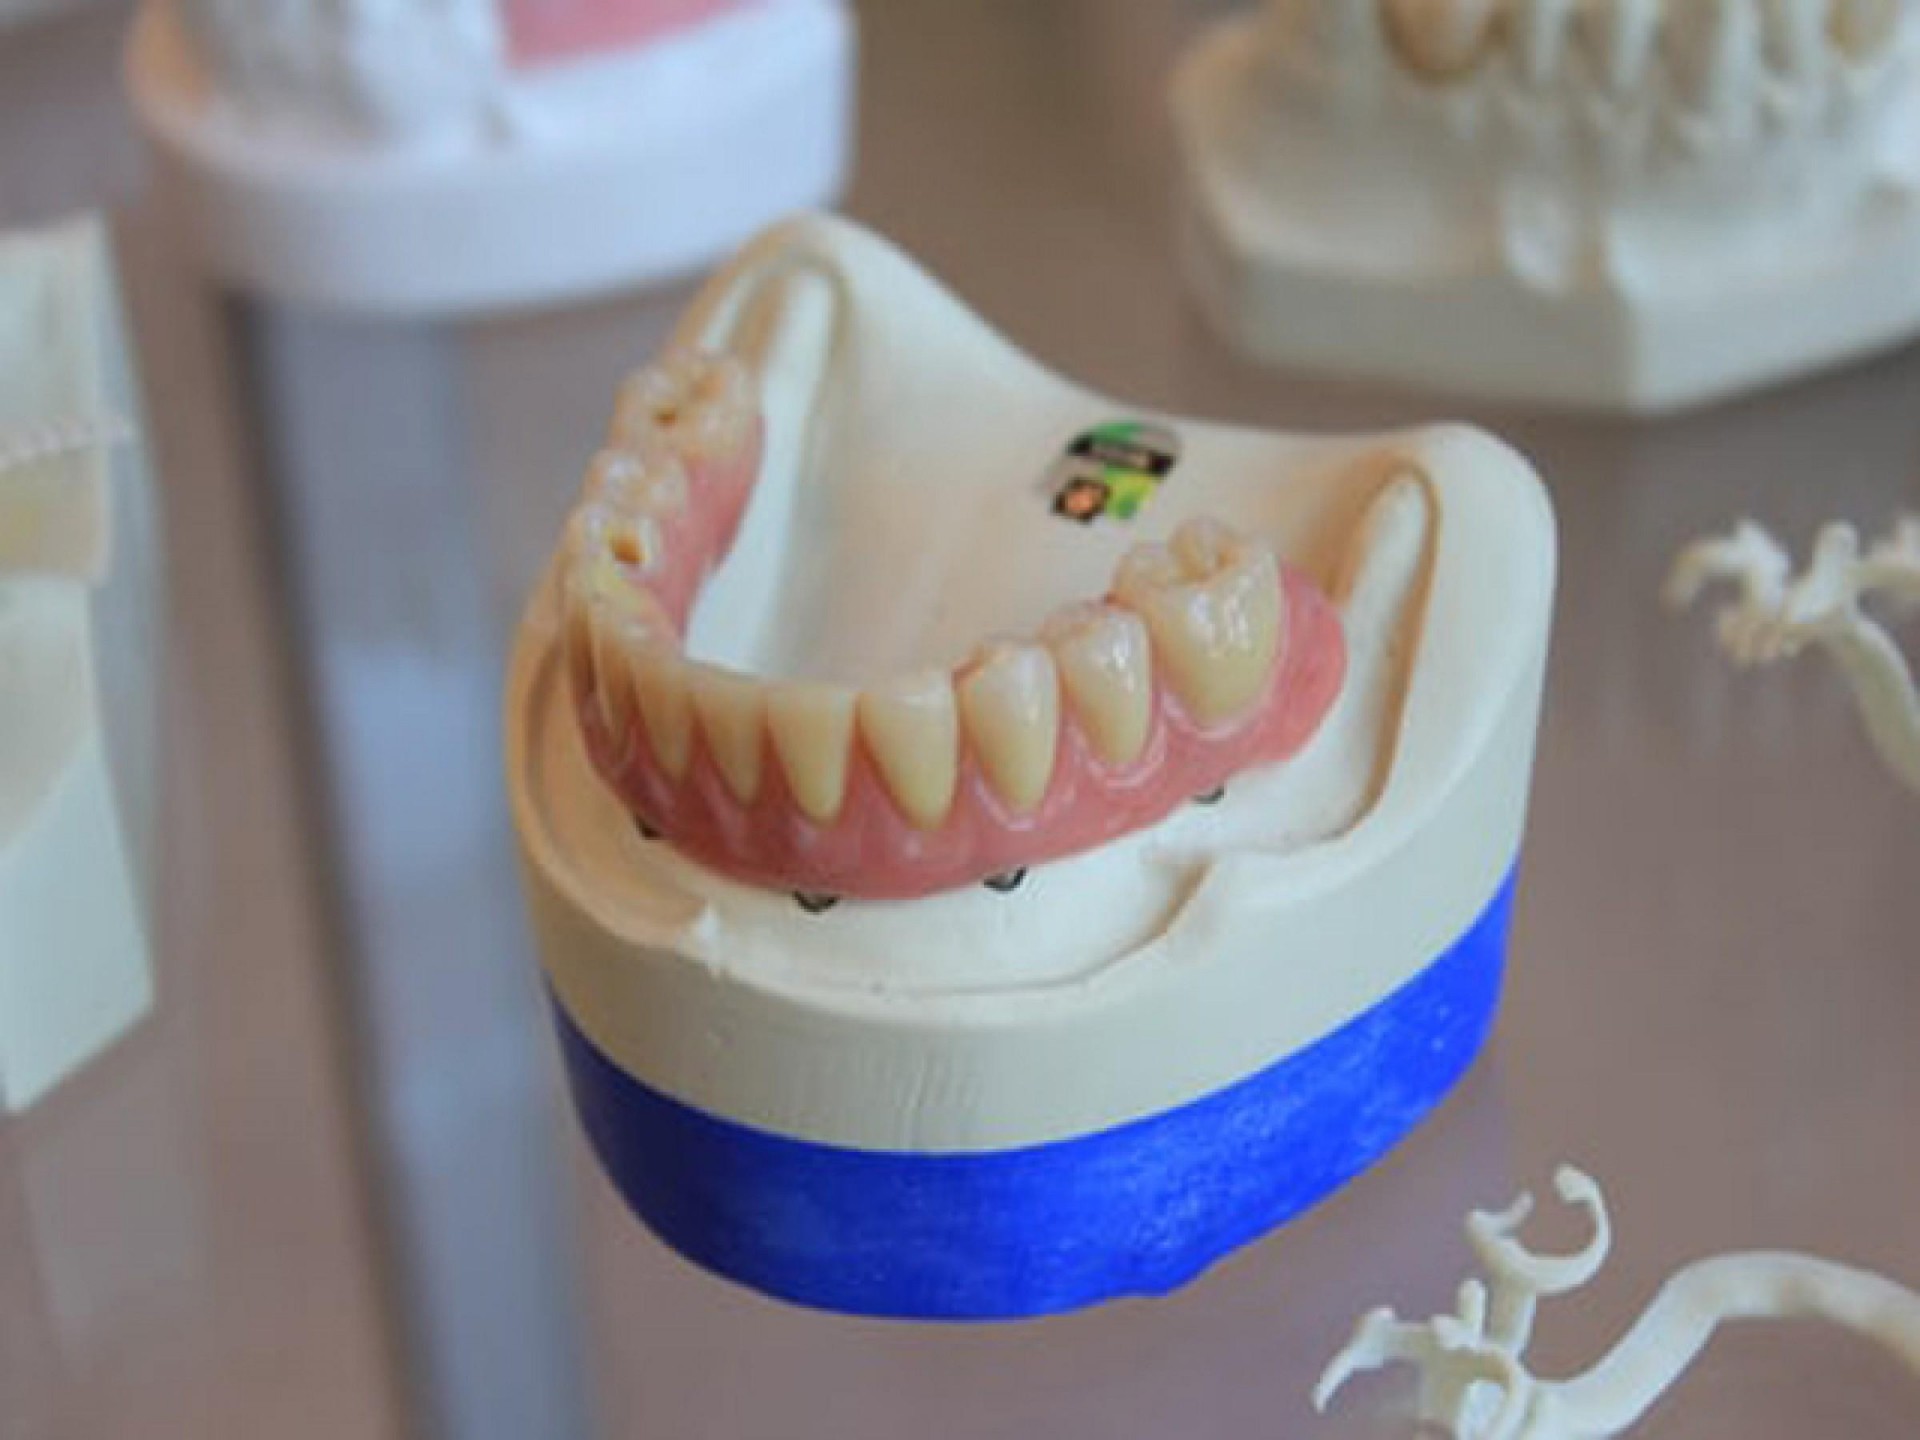 Closing Down Sale - Dental LaboratoryBusiness For Sale